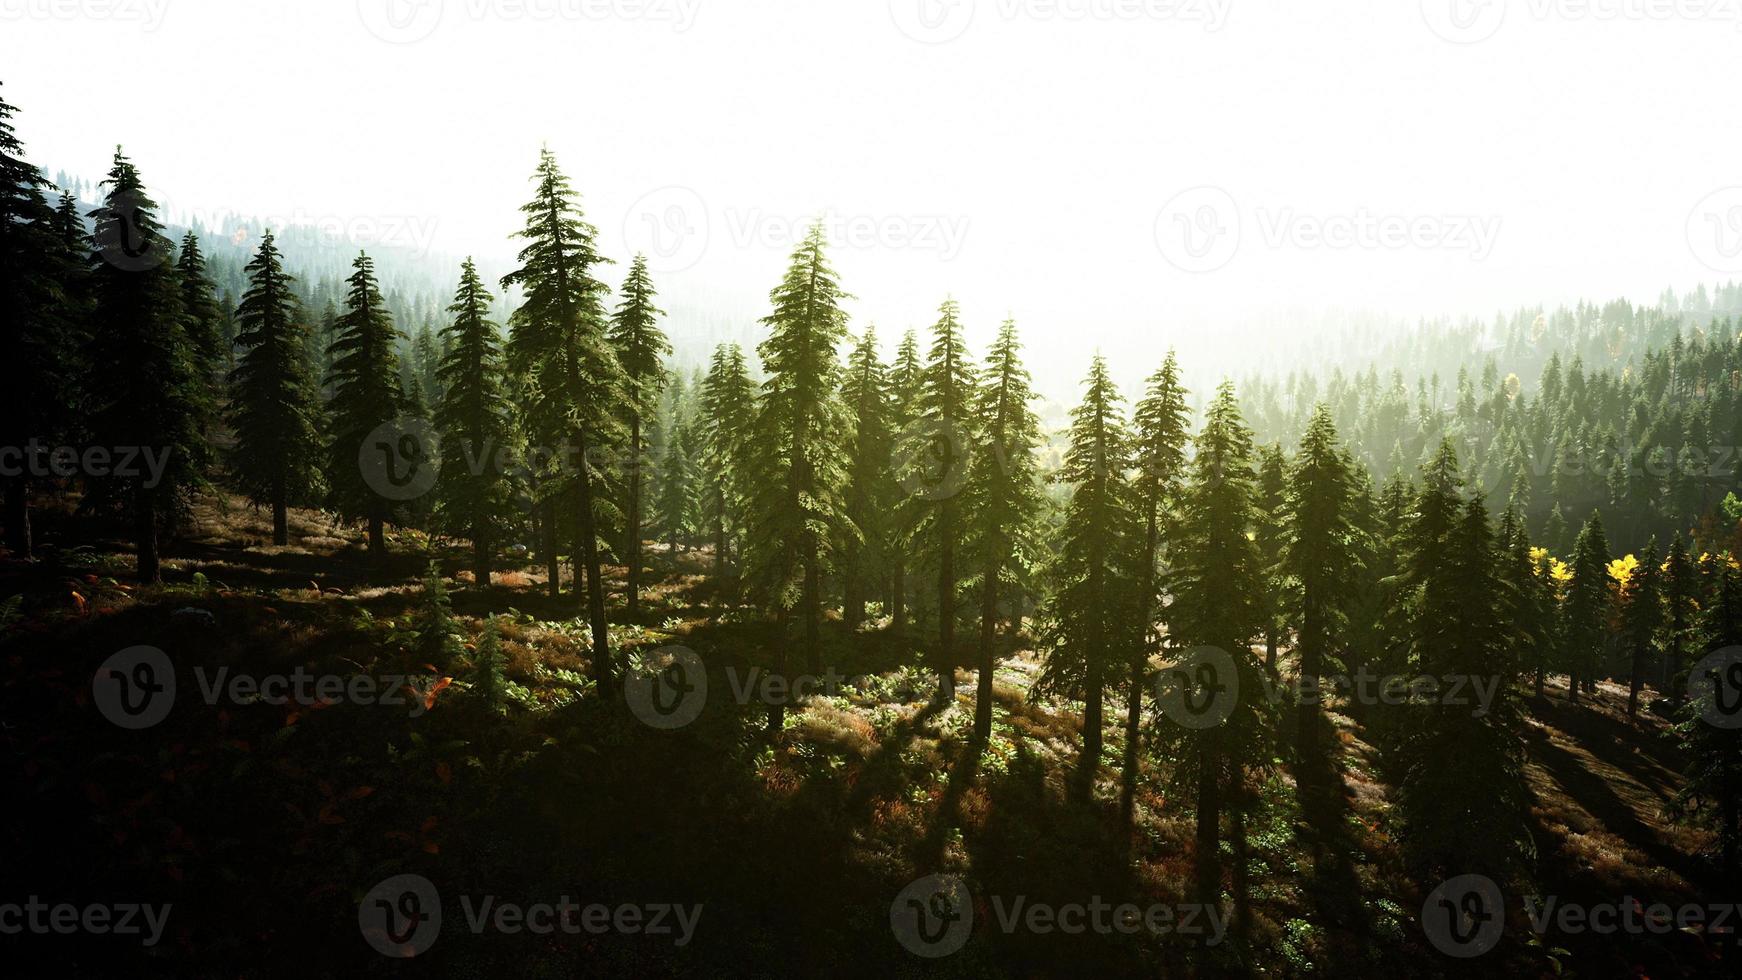 Misty mountain forest landscape in the morning photo